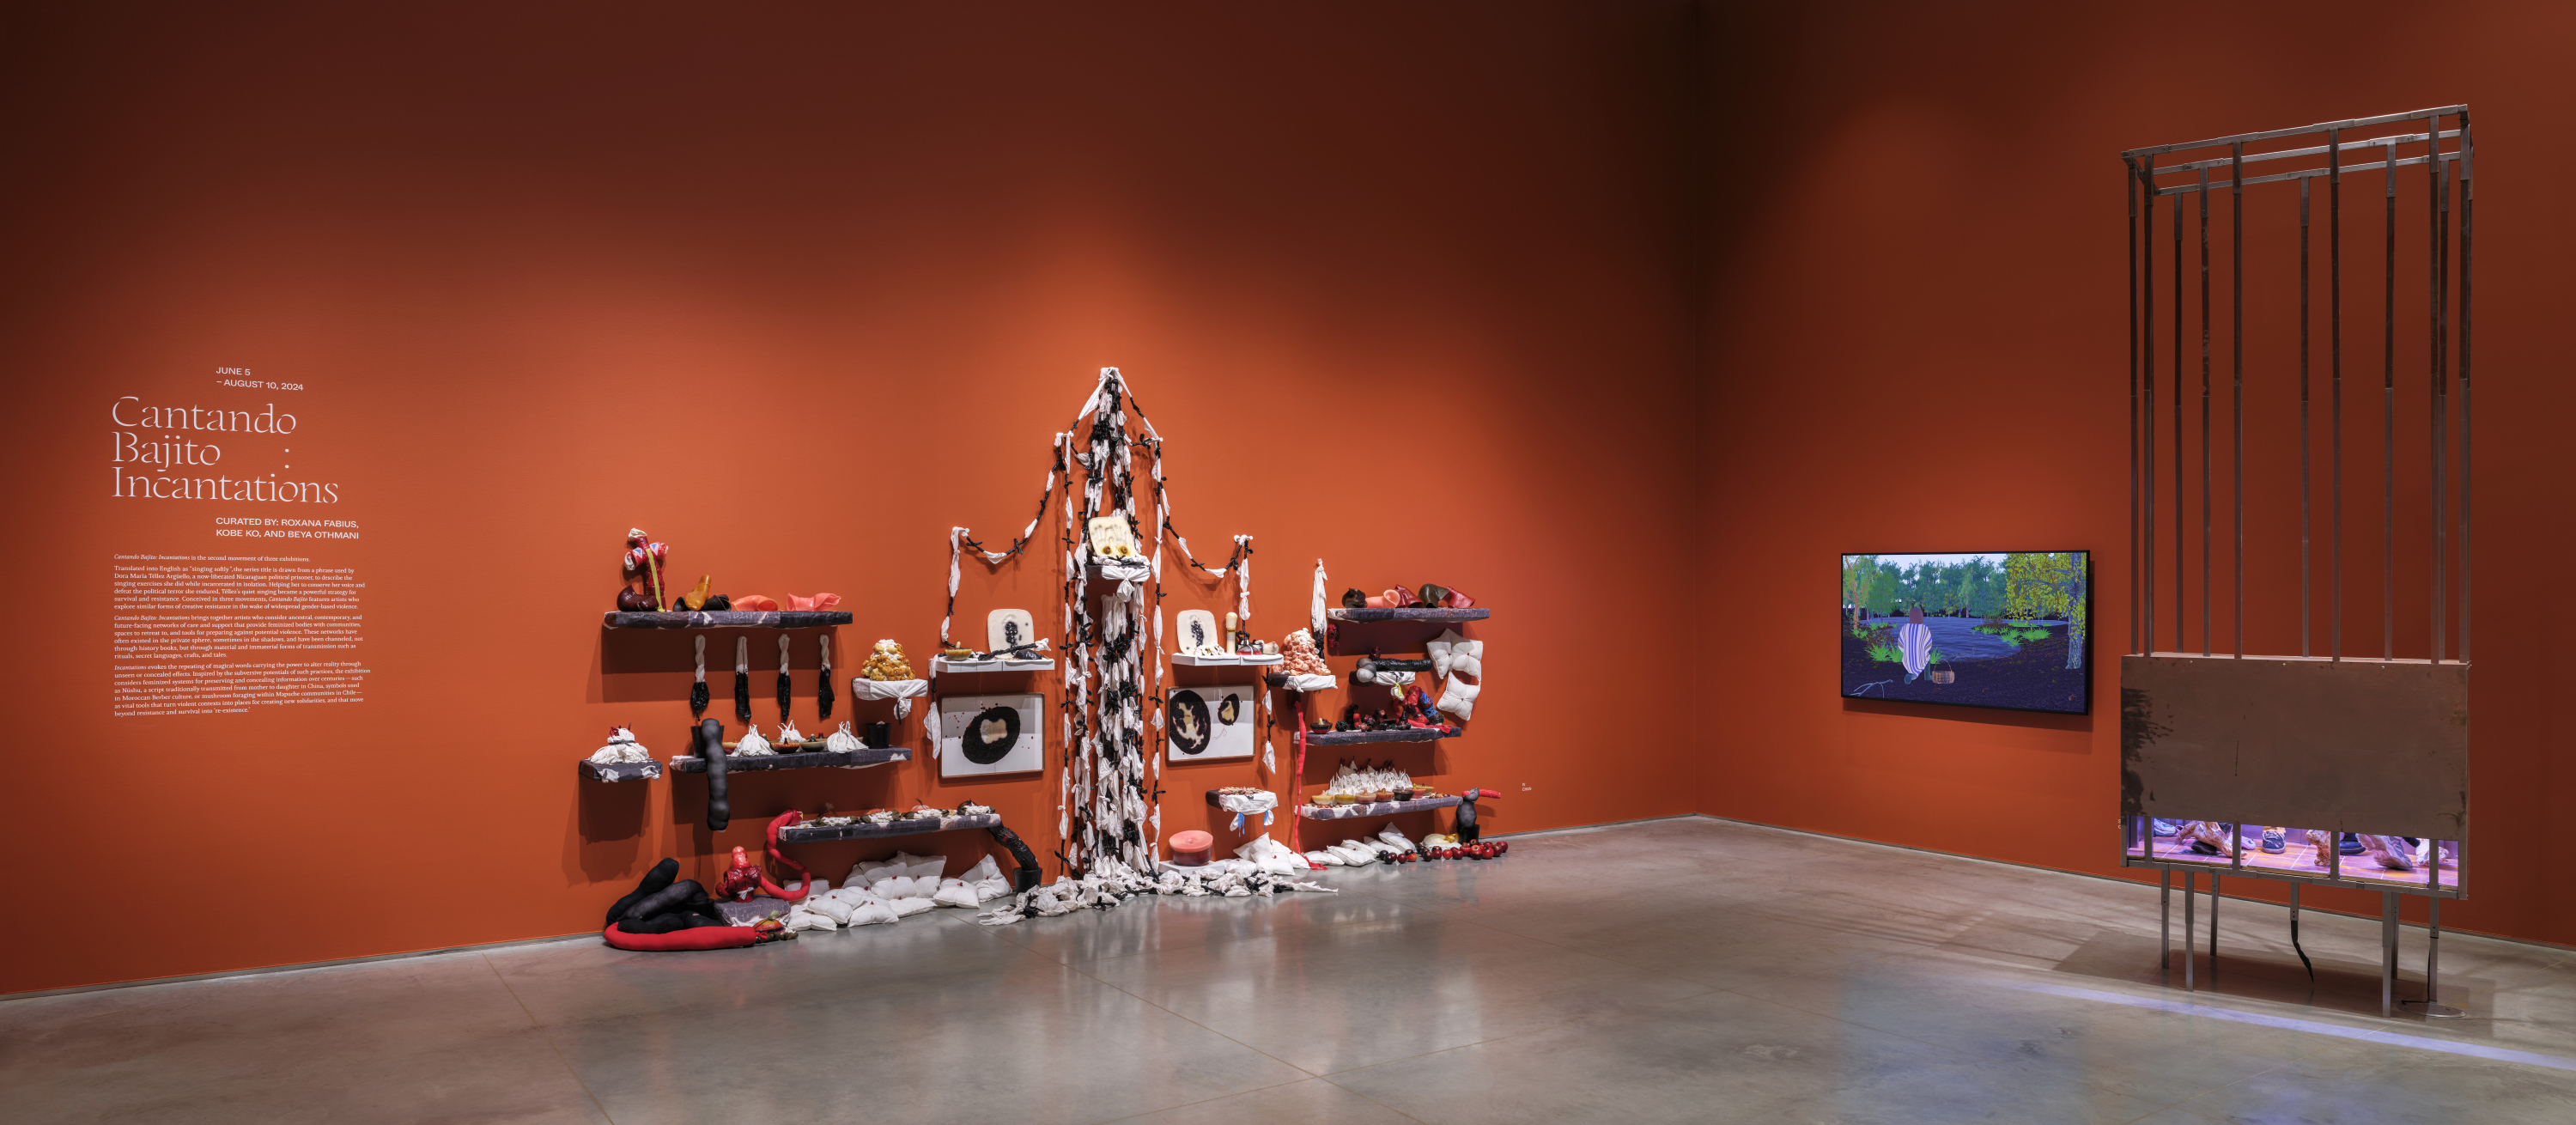 Gallery interior with terracotta-red walls and a gray floor. There are several artworks displayed - from left to right - a soft-sculpture mixed-media installation, a tv monitor with a video animation, and a ceiling-height cage sculptural installation.